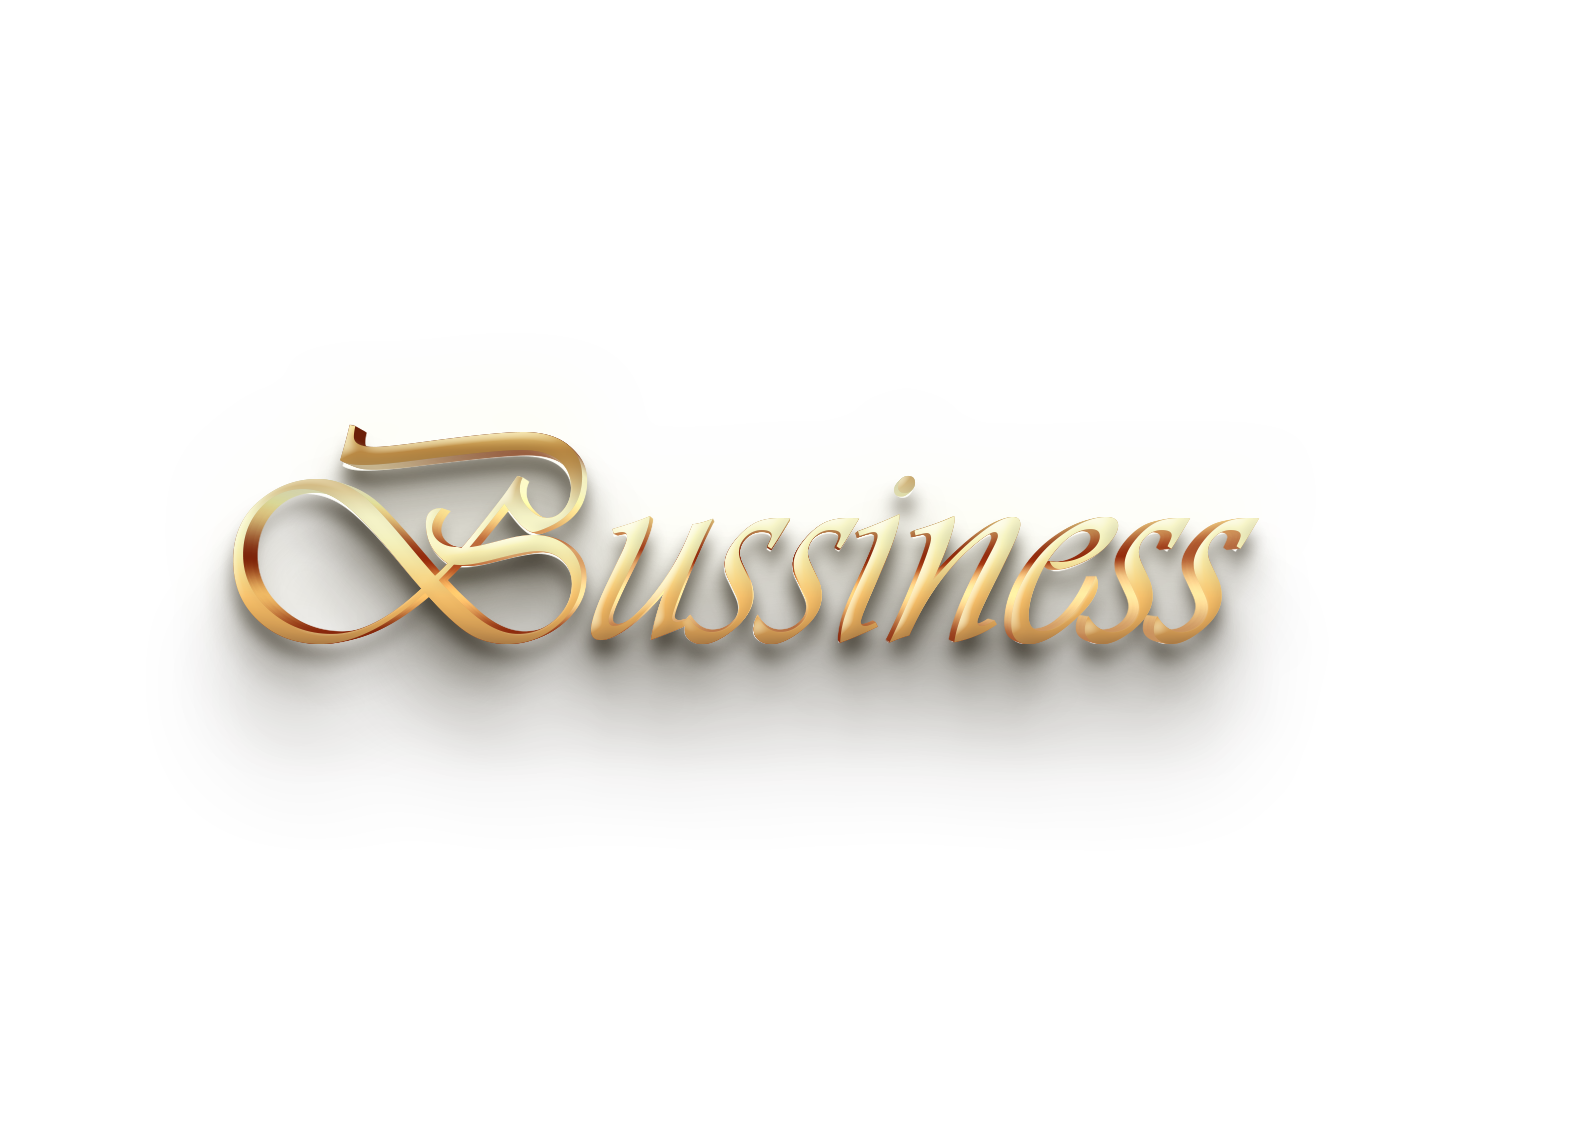 WORD BUSINESS gold 3D text effects art typography PNG images free